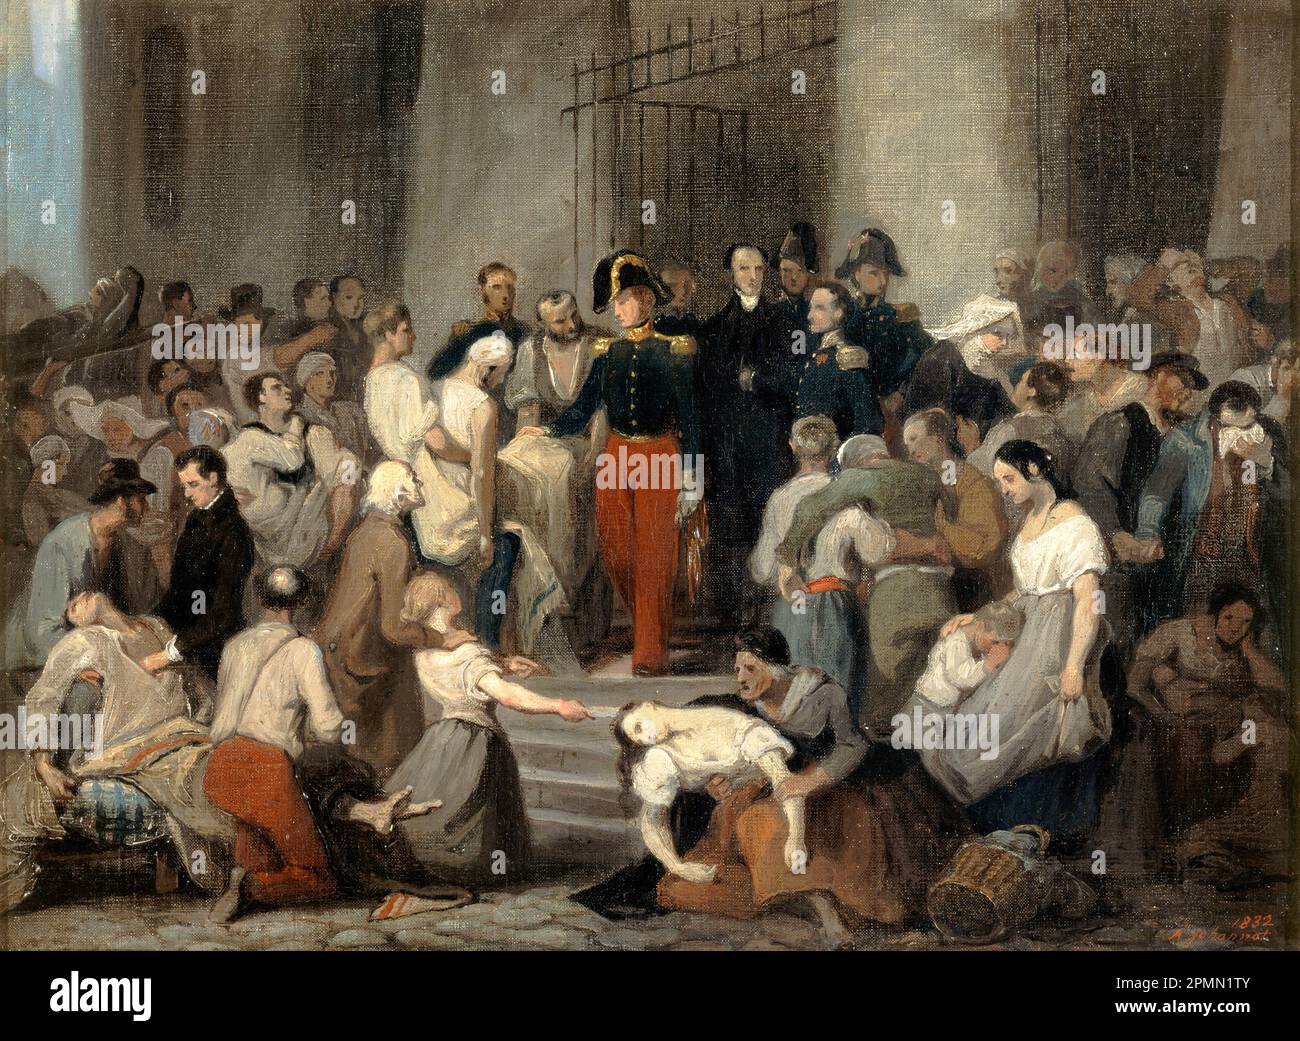 The Duke of Orléans visiting the sick at the Hôtel-Dieu during the cholera epidemic in 1832 Stock Photo